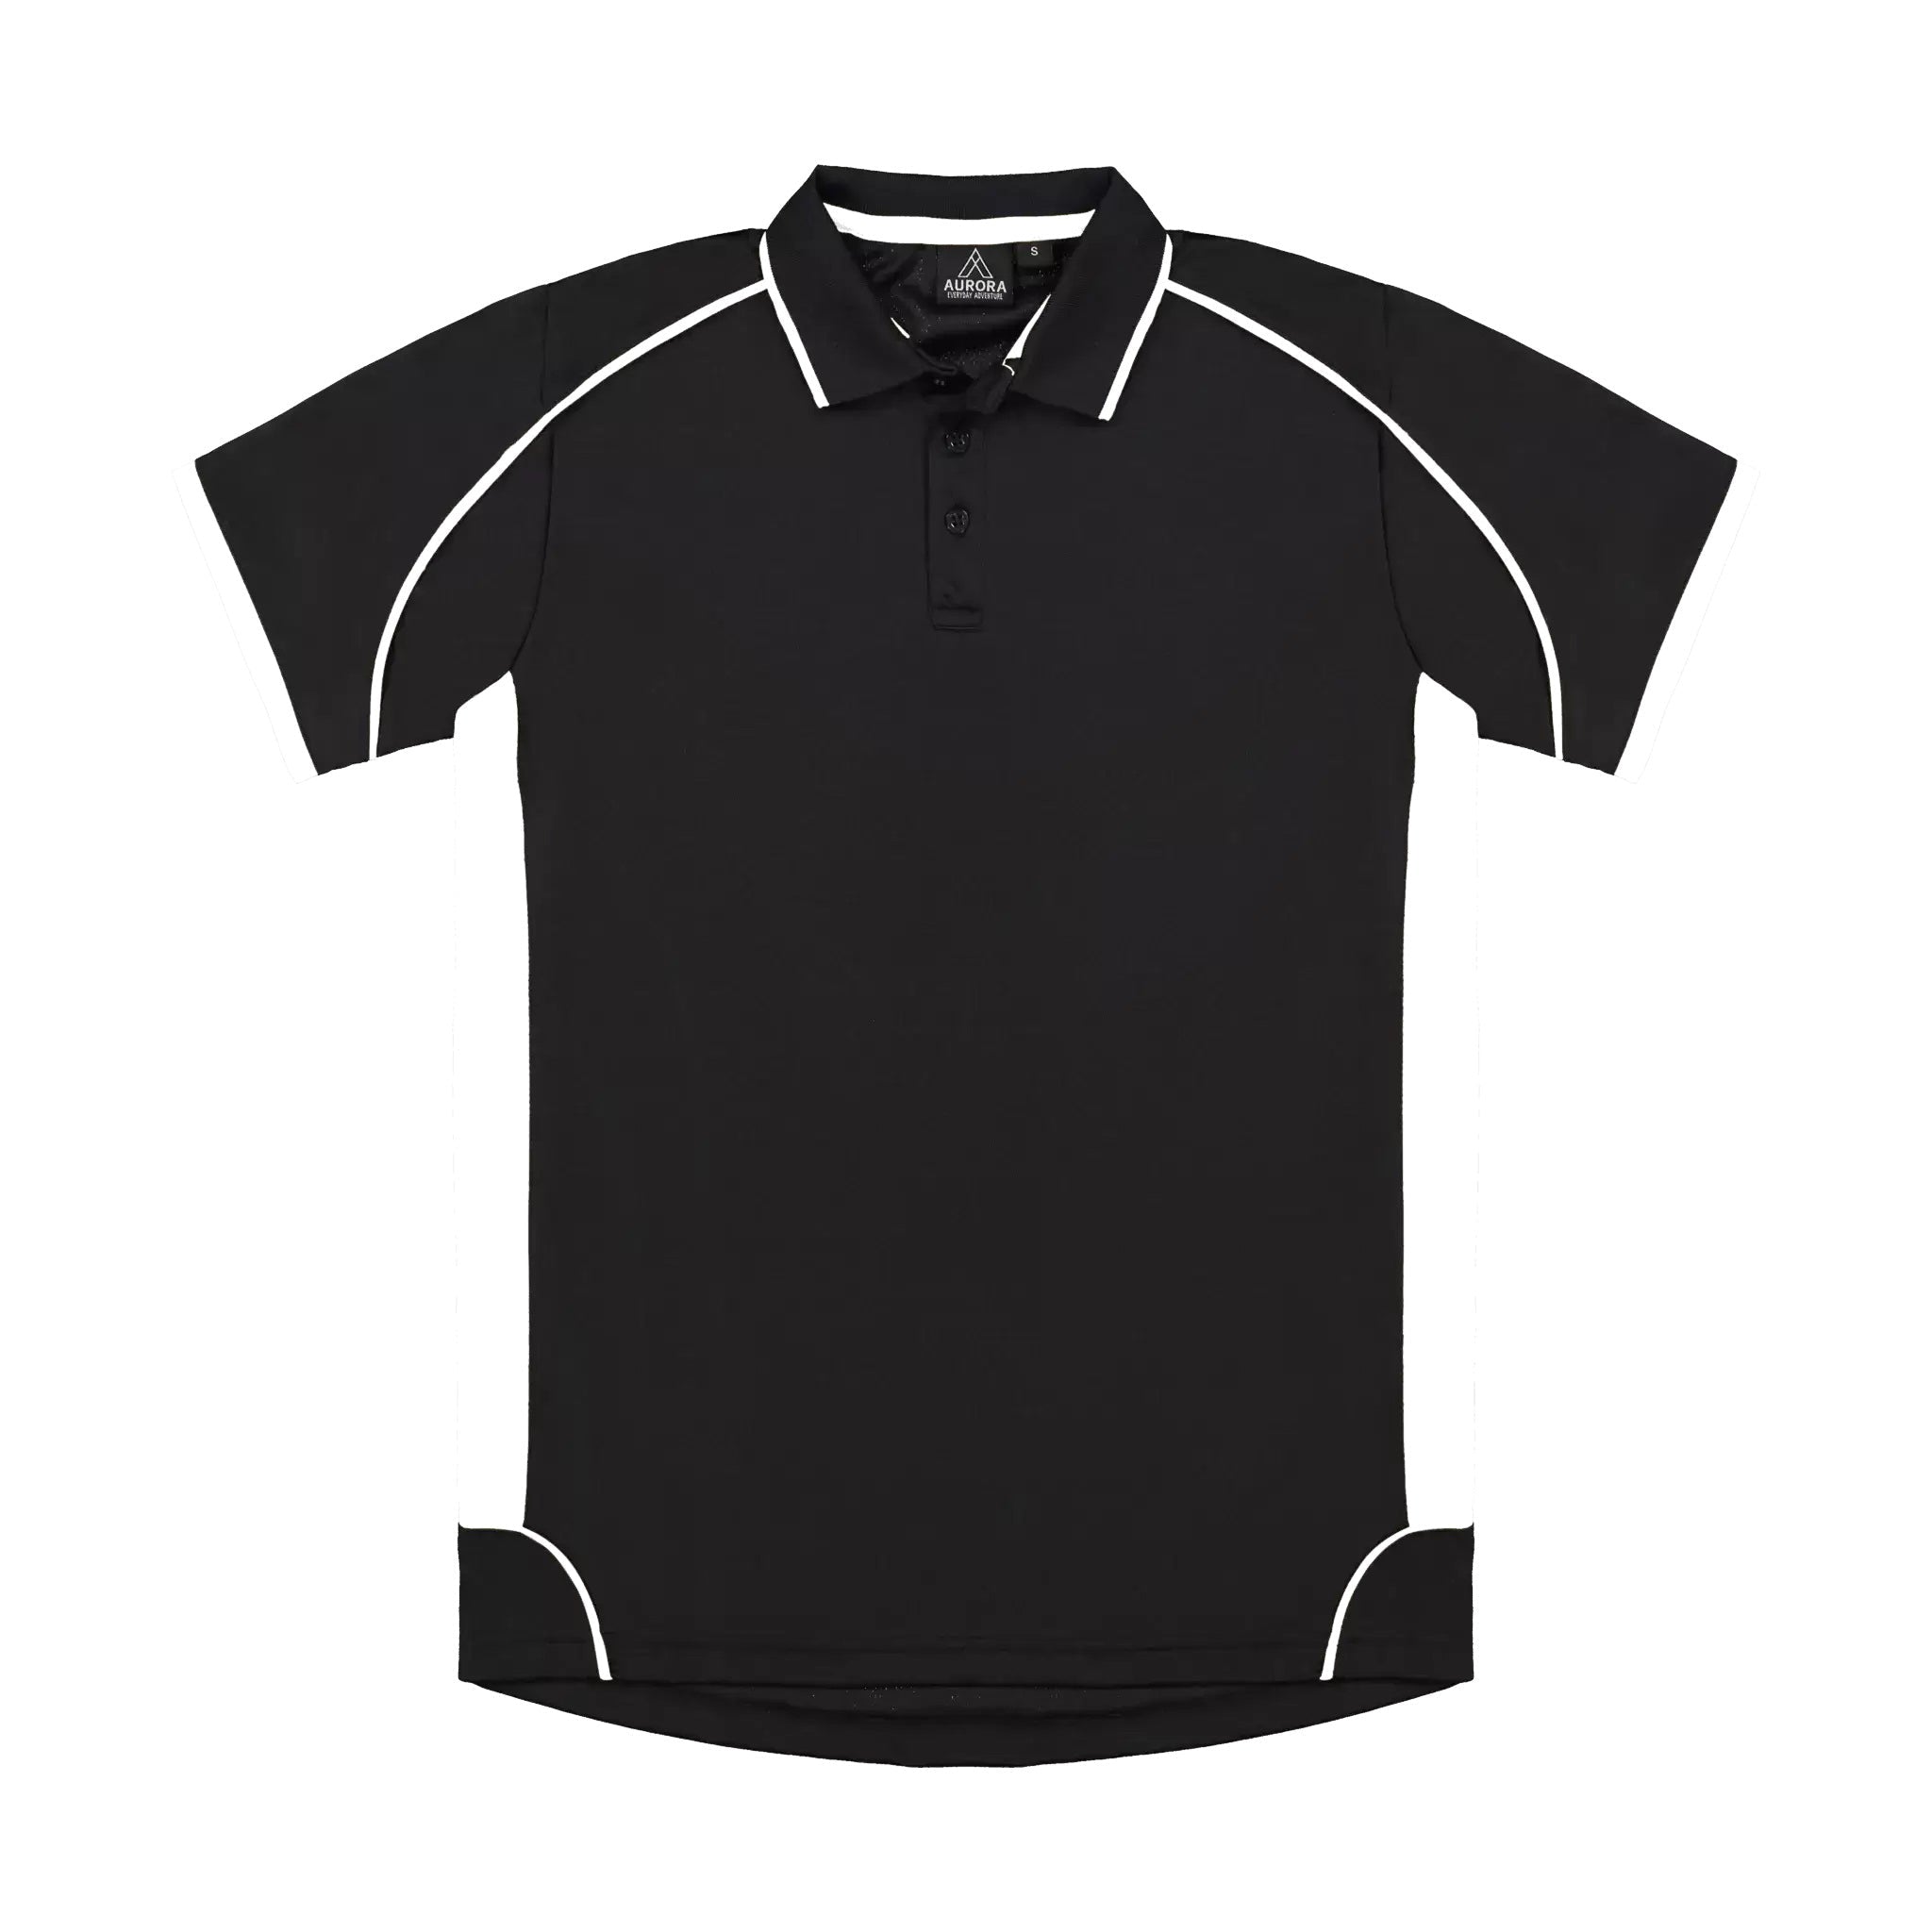 Unisex Matchpace Polo